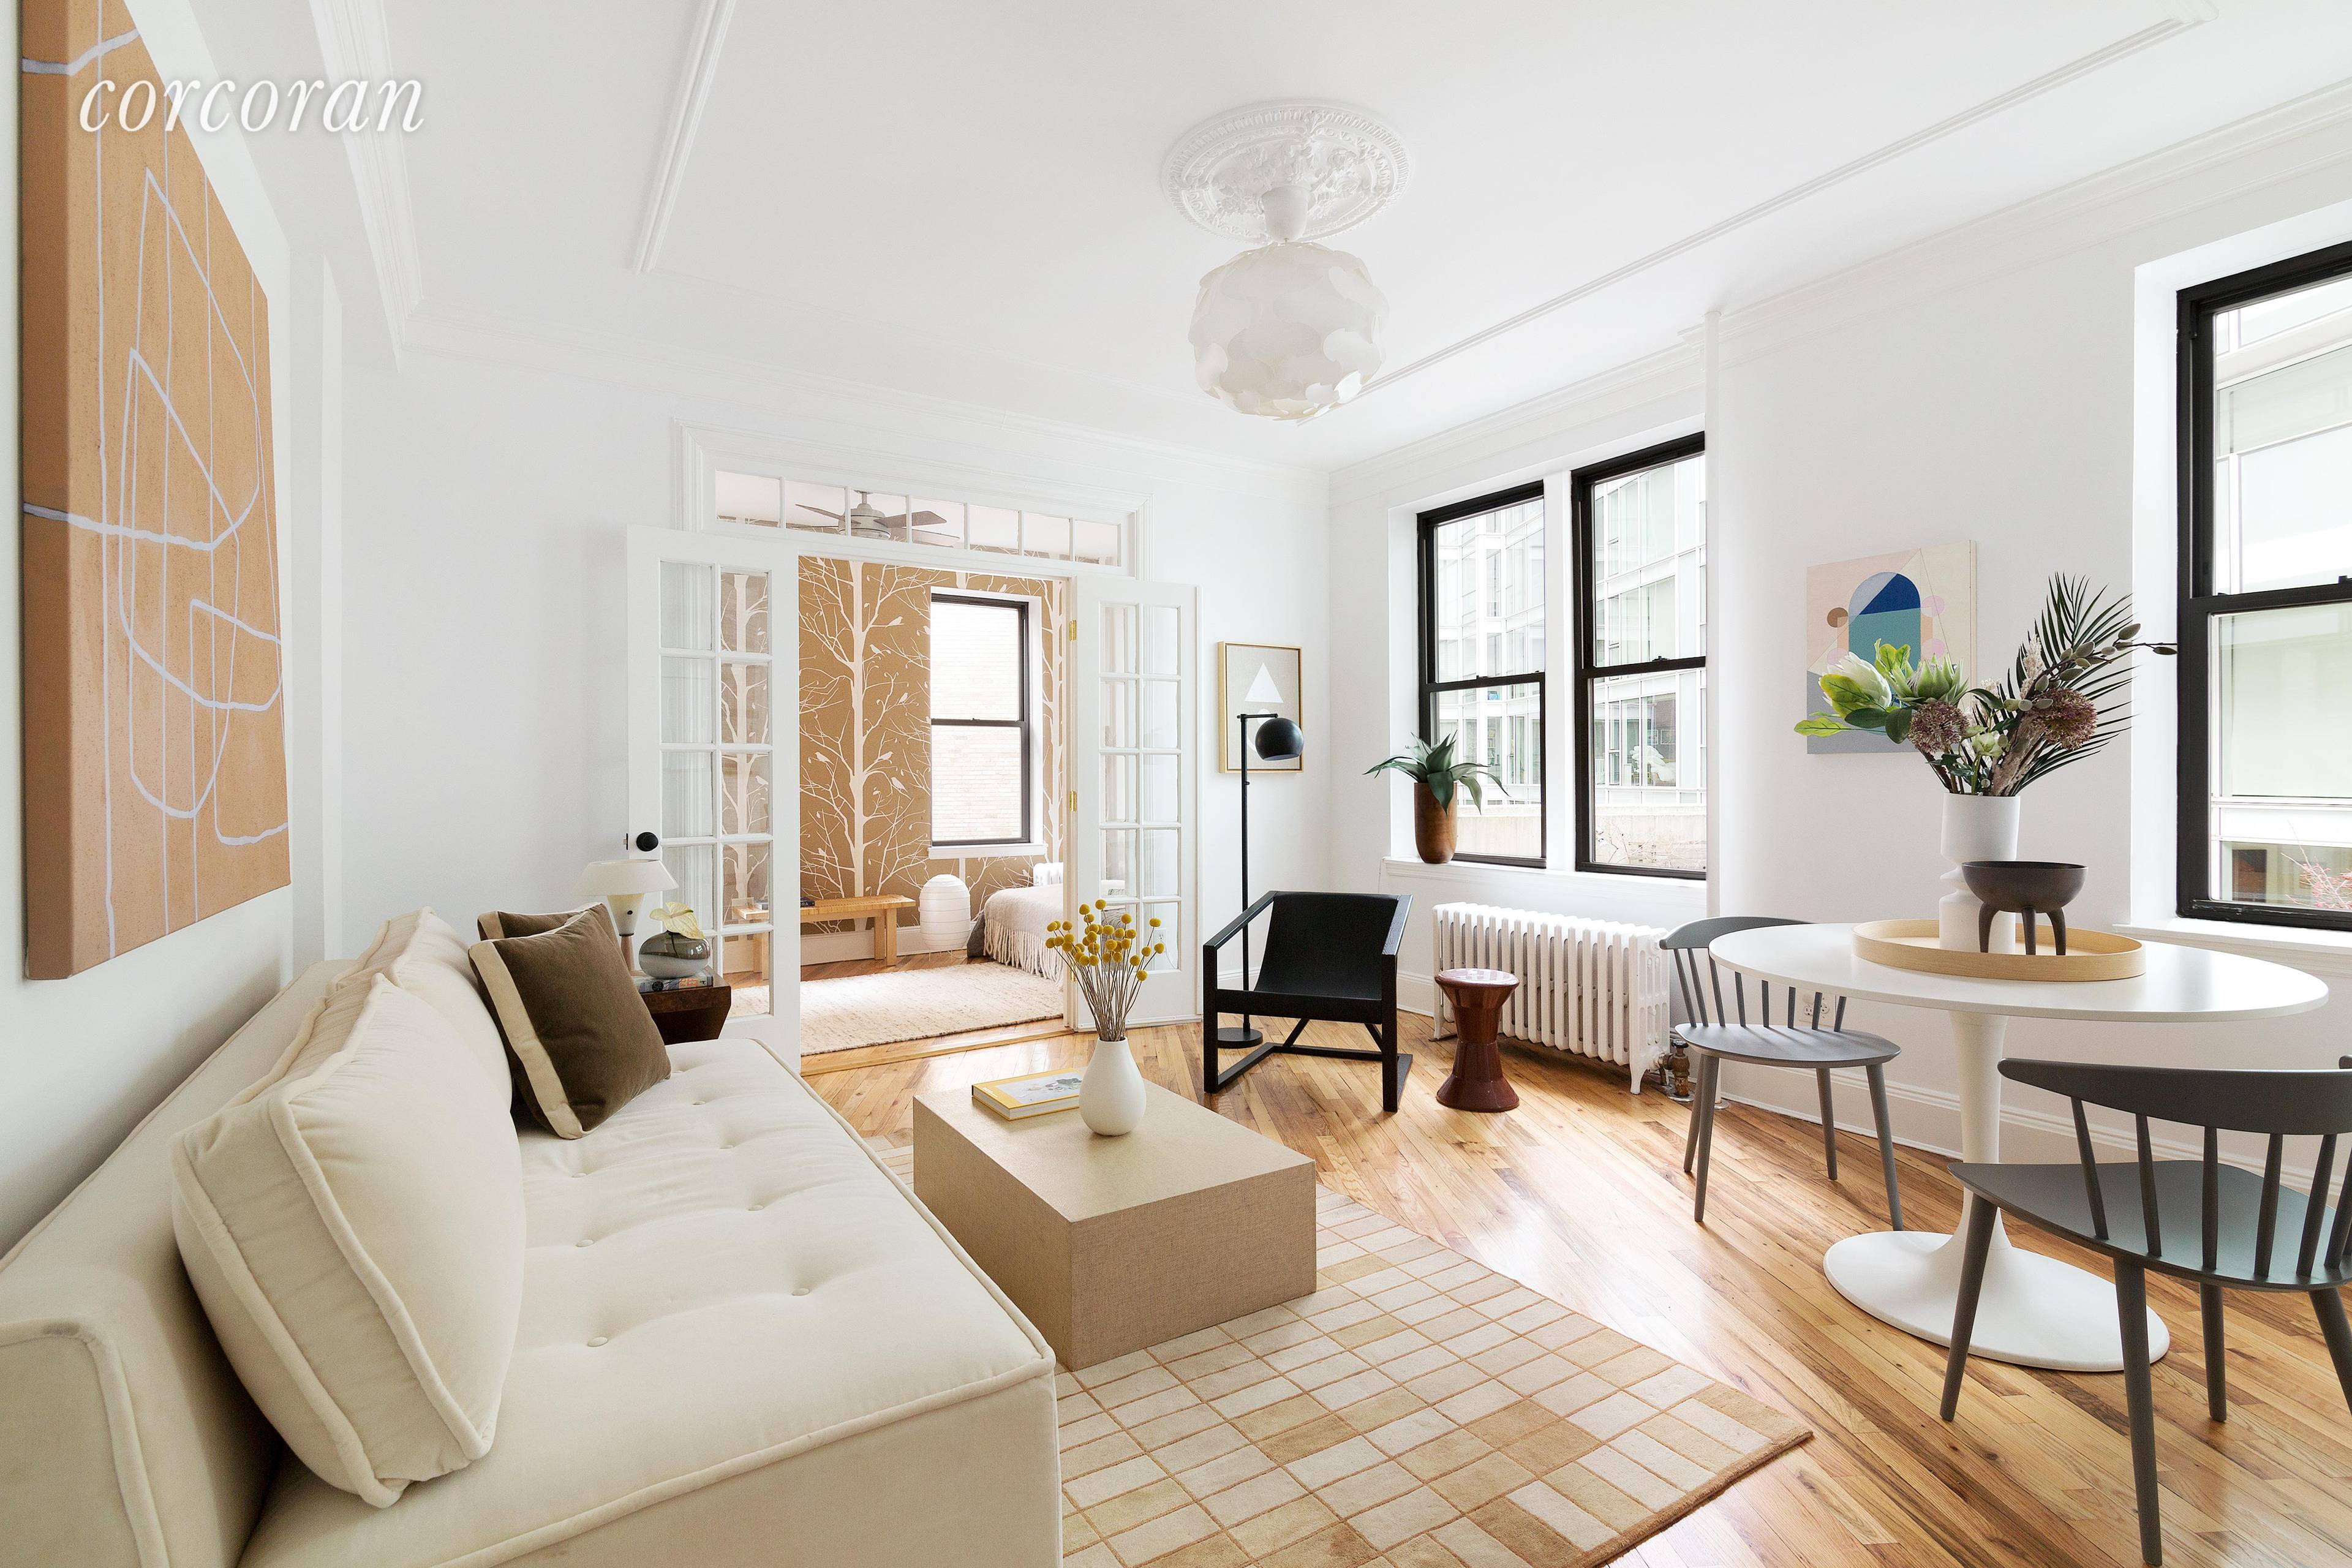 Perfectly Picturesque pre war 2 bedroom, 1 bath coop on one of Prospect Heights most idyllic blocks.